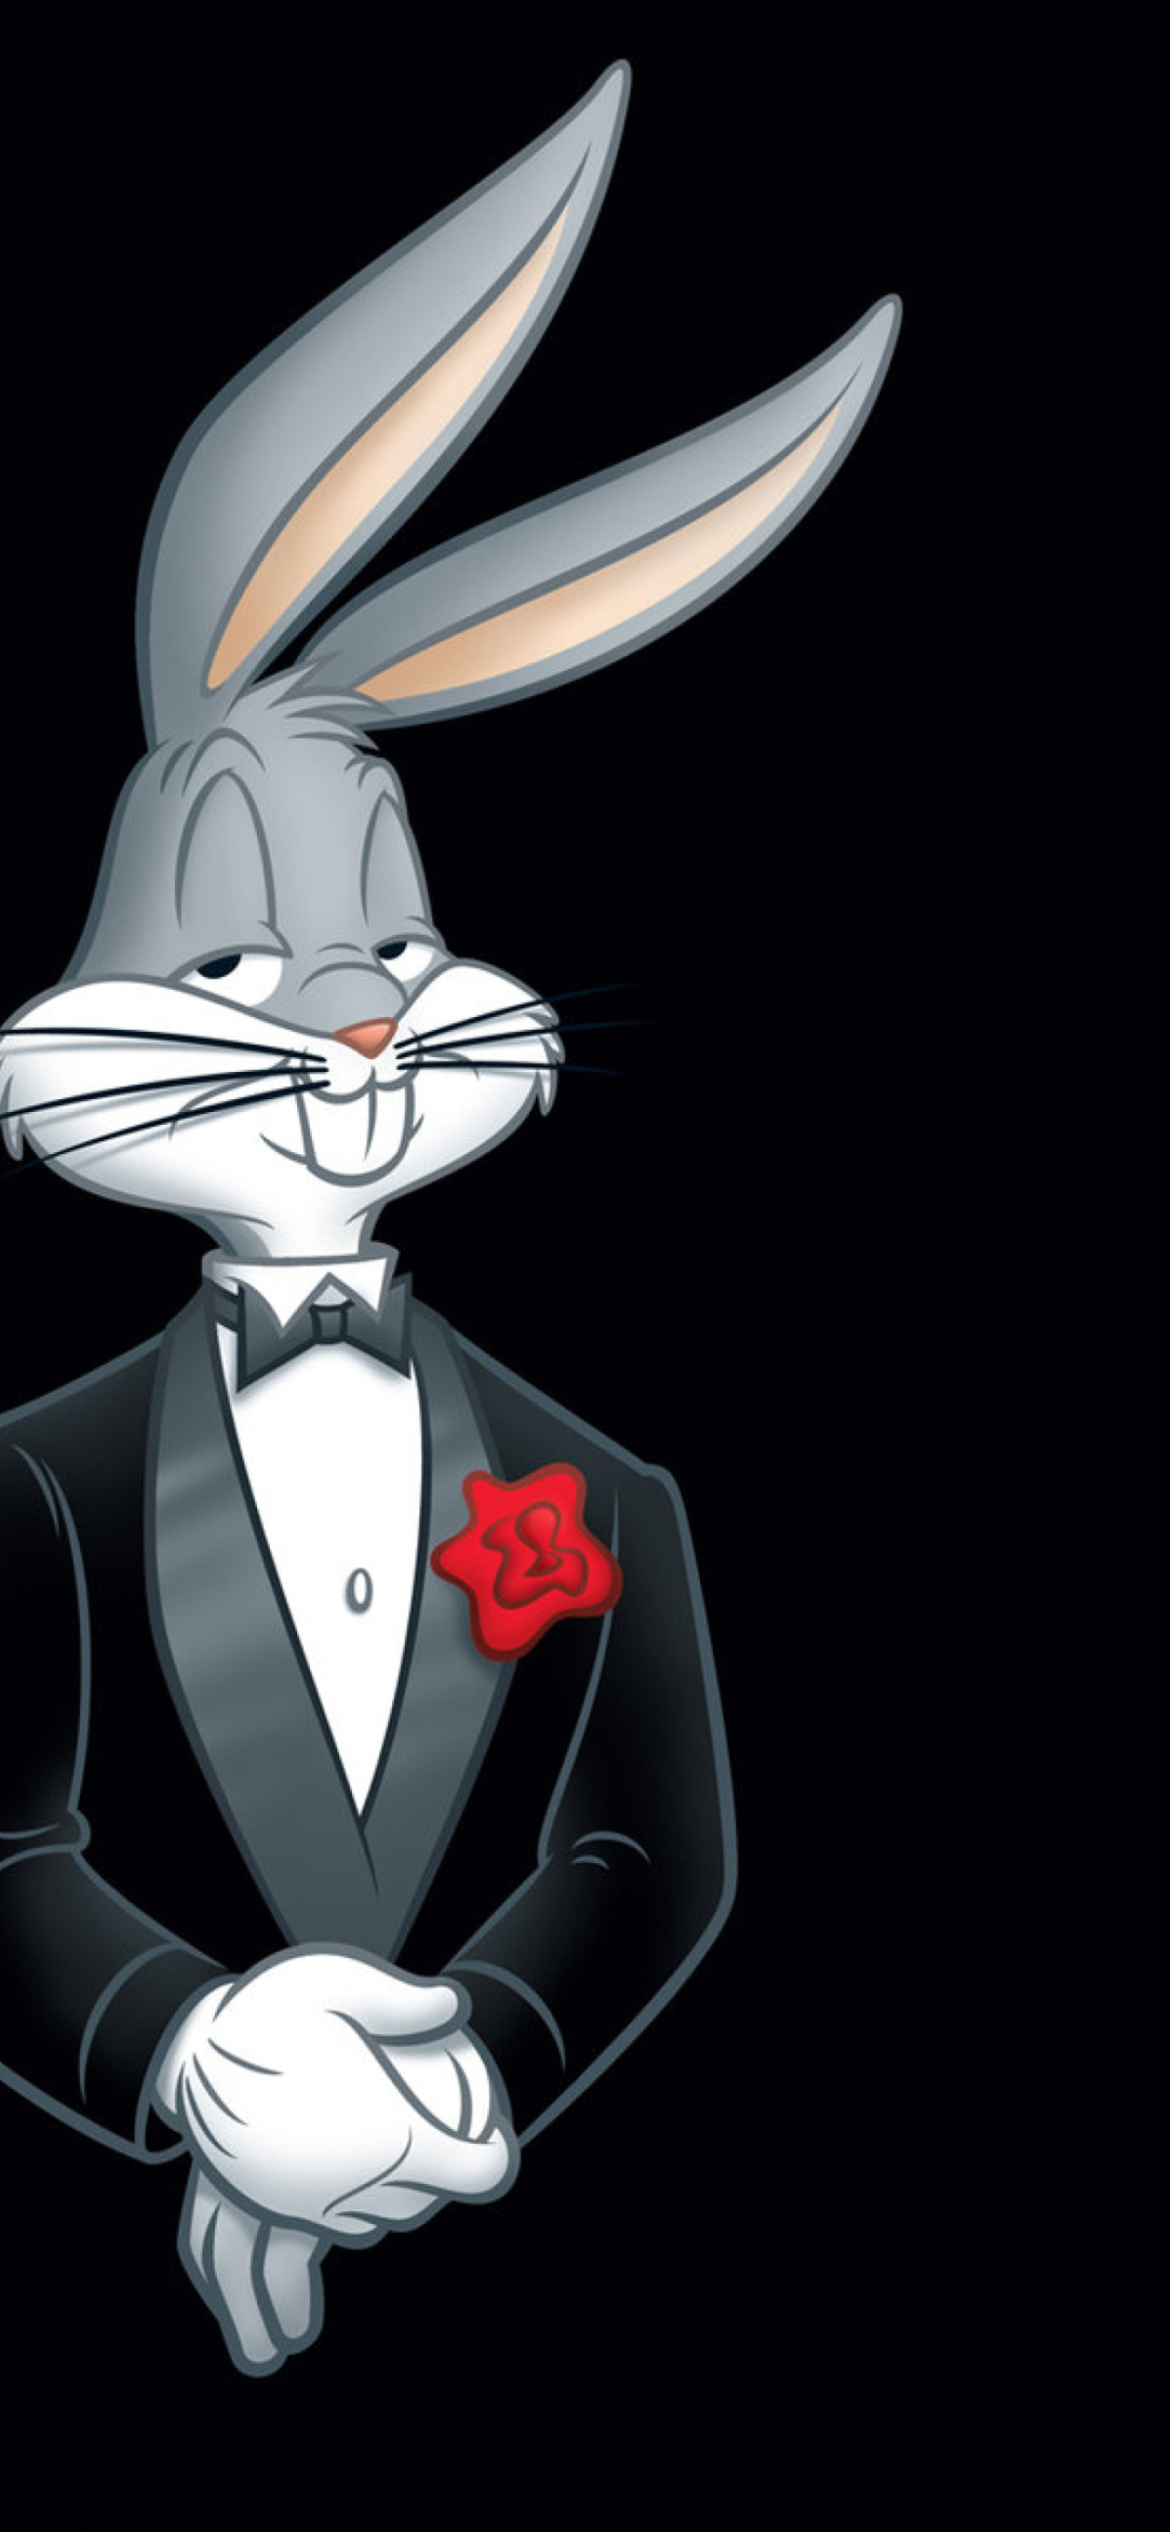 1388820 Space Jam 2 Movie Space Jam A New Legacy Bugs Bunny  Rare  Gallery HD Wallpapers